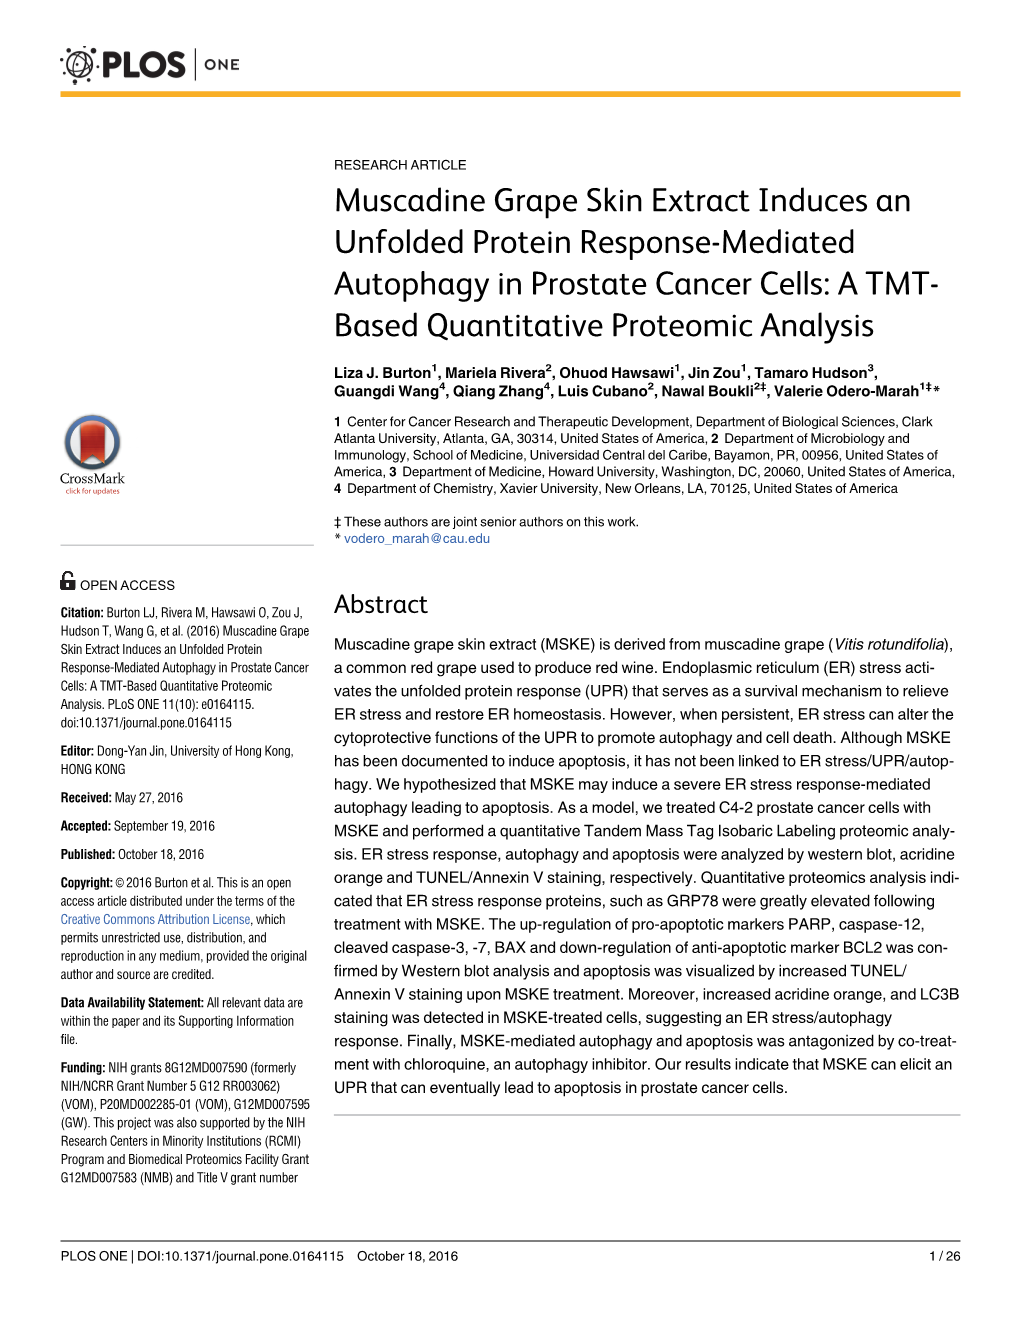 Muscadine Grape Skin Extract Induces an Unfolded Protein Response-Mediated Autophagy in Prostate Cancer Cells: a TMT- Based Quantitative Proteomic Analysis